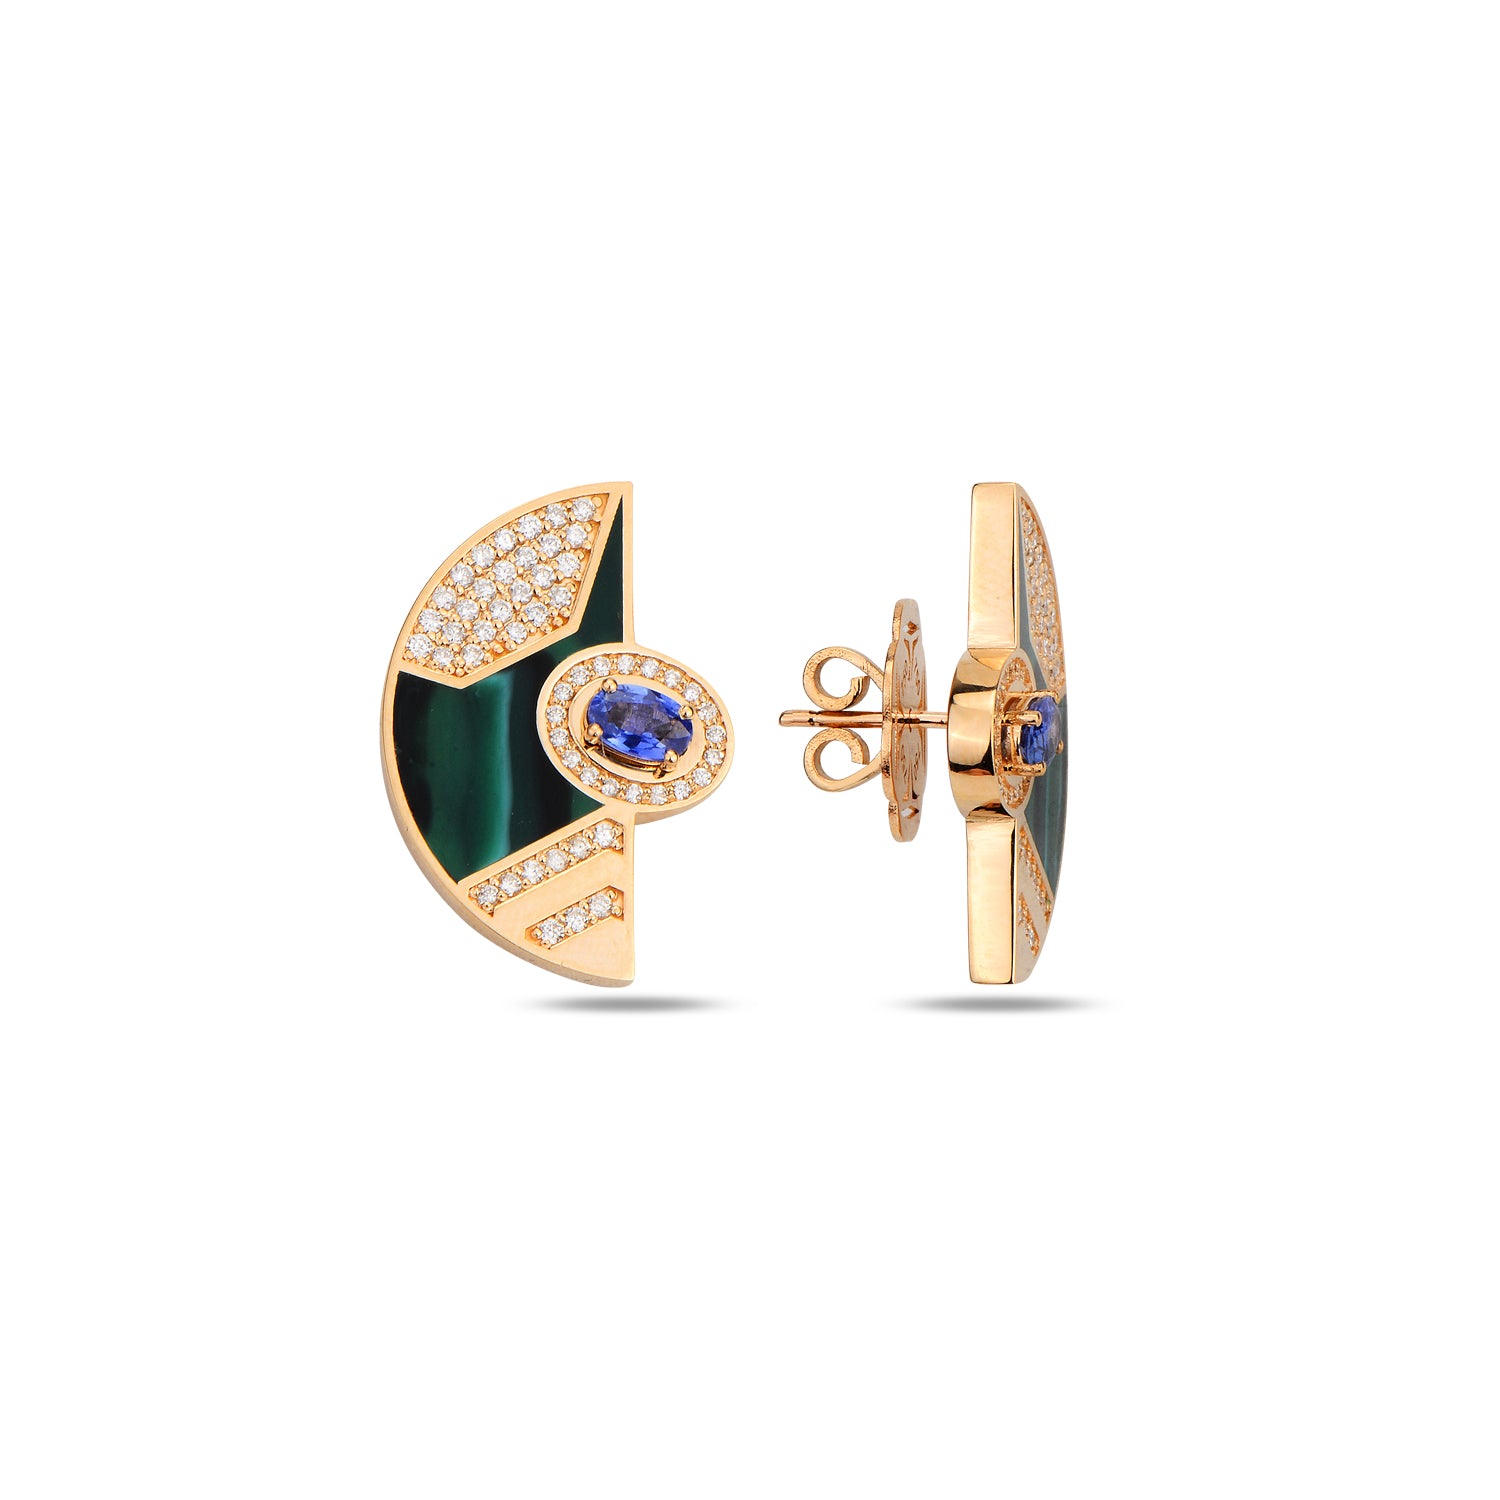 Epoca Coin Earrings with Sapphire